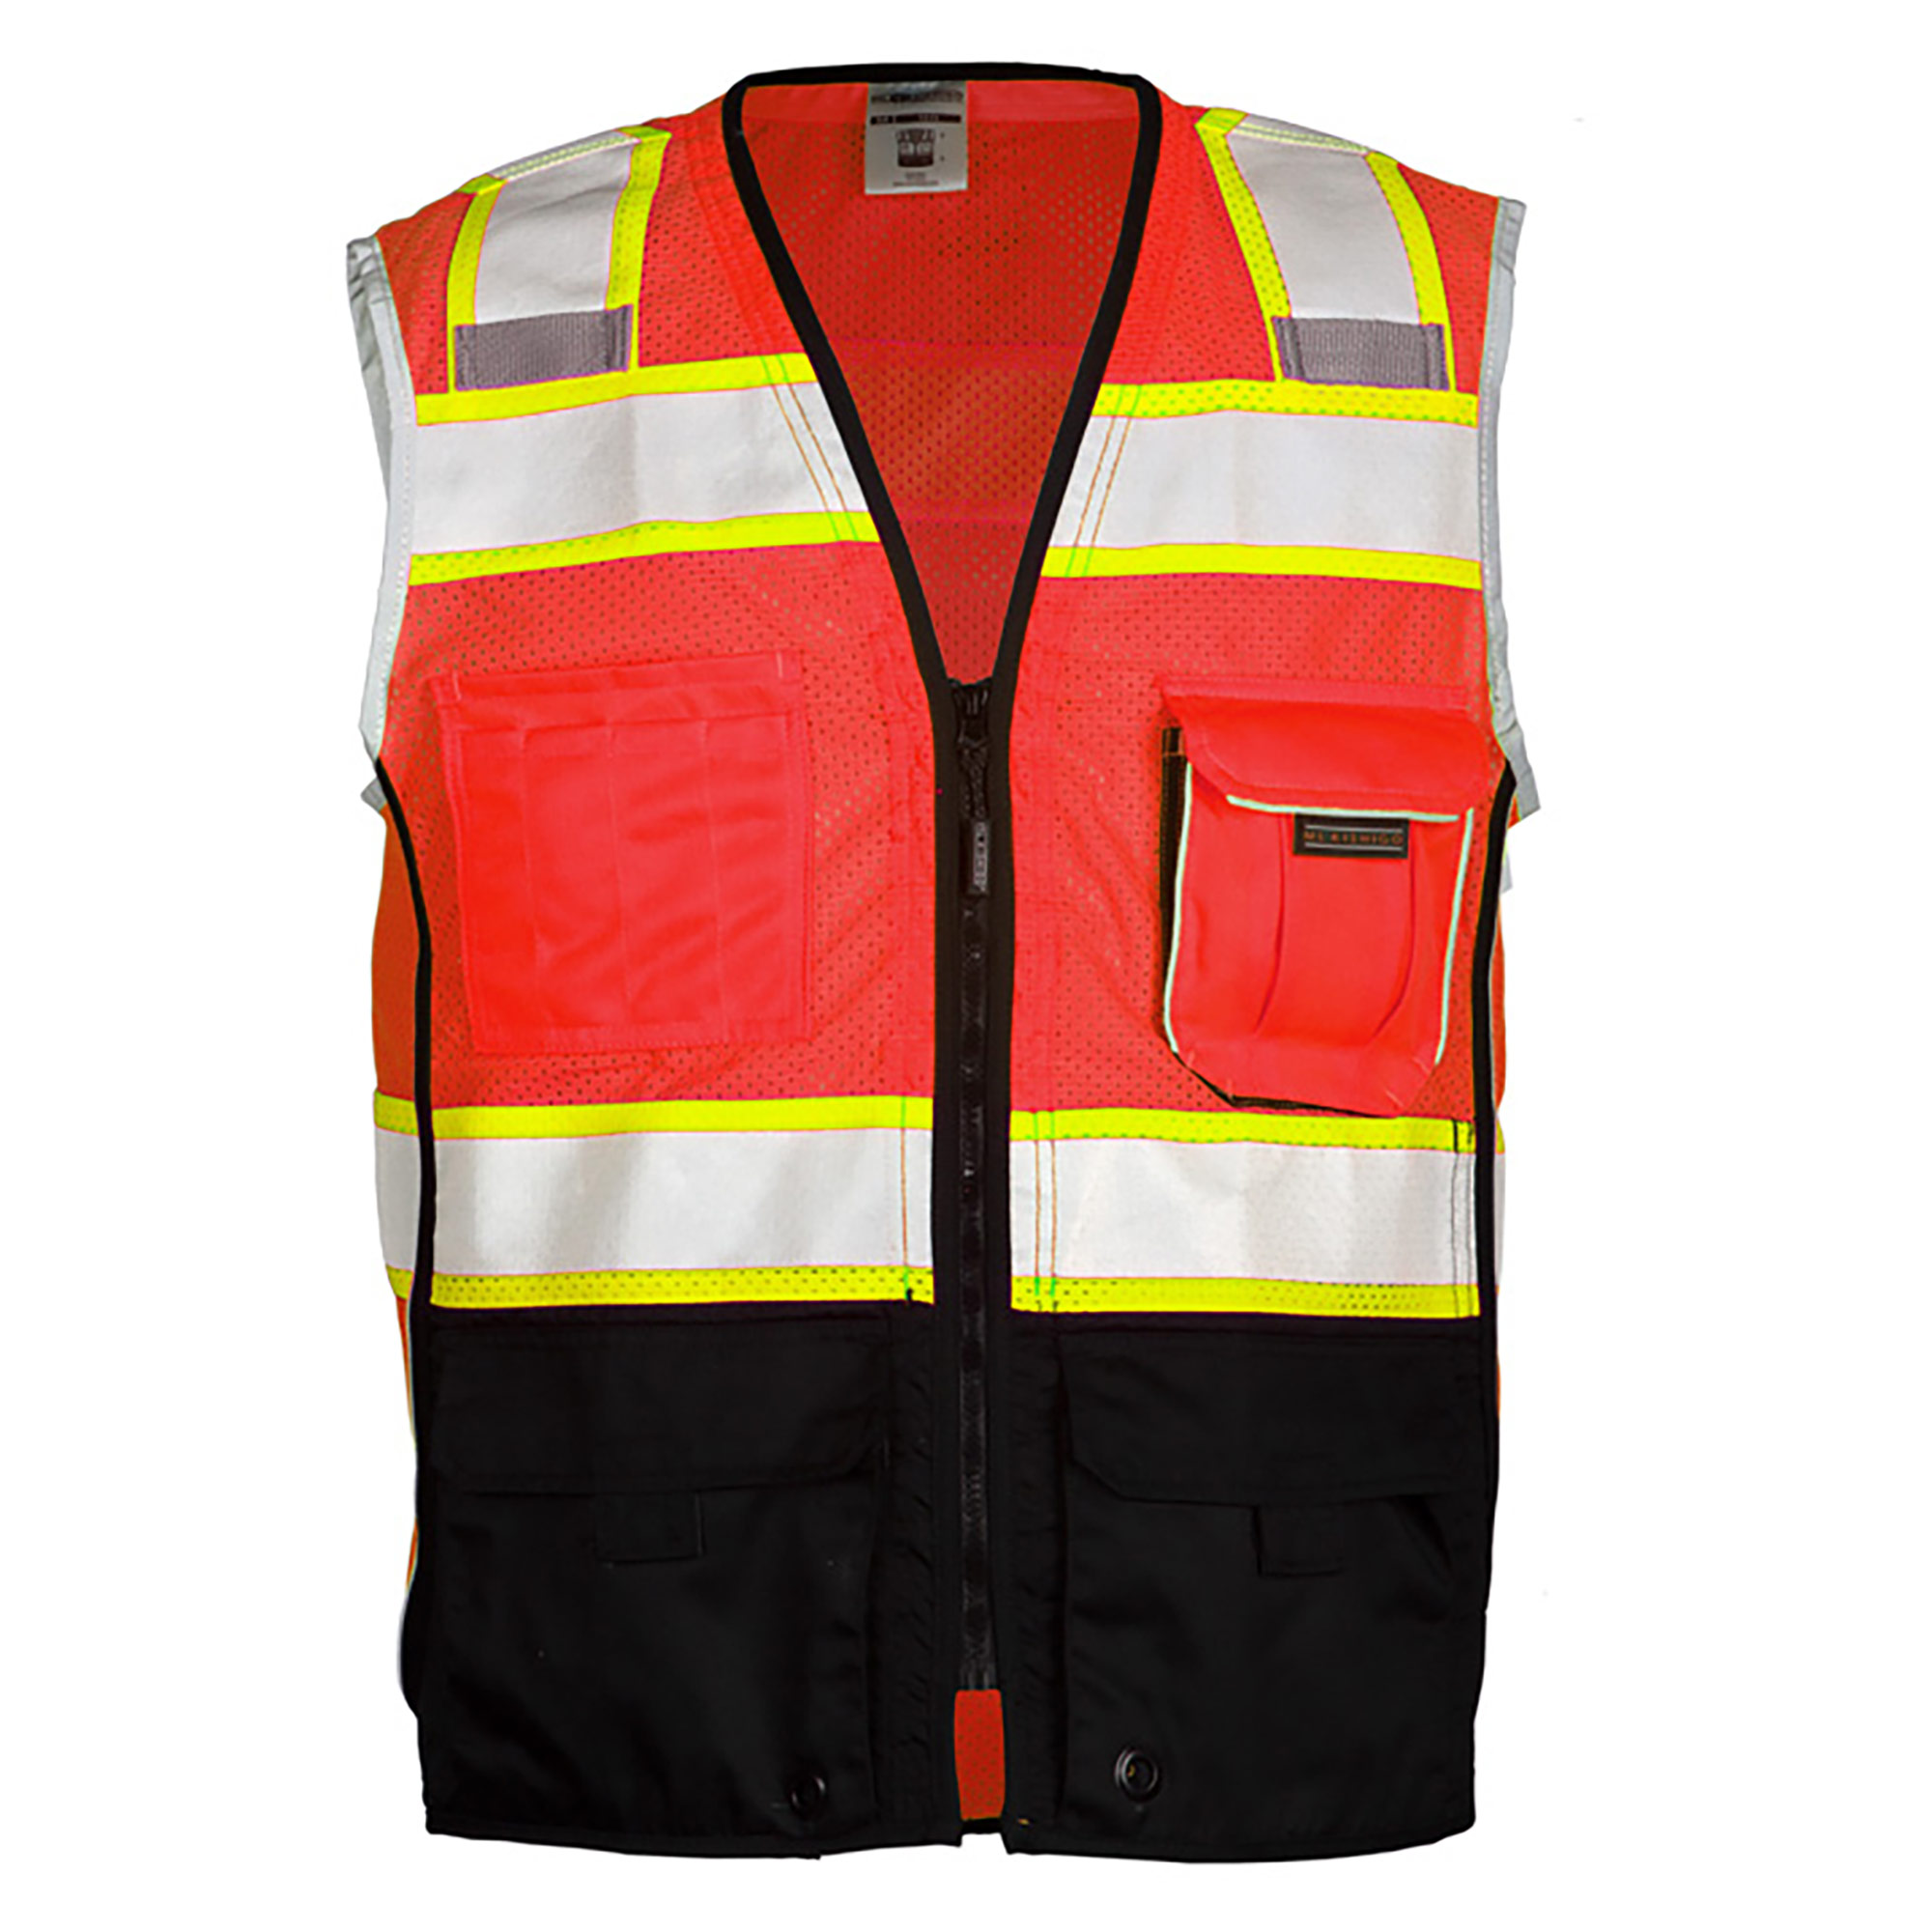 lowes red vest